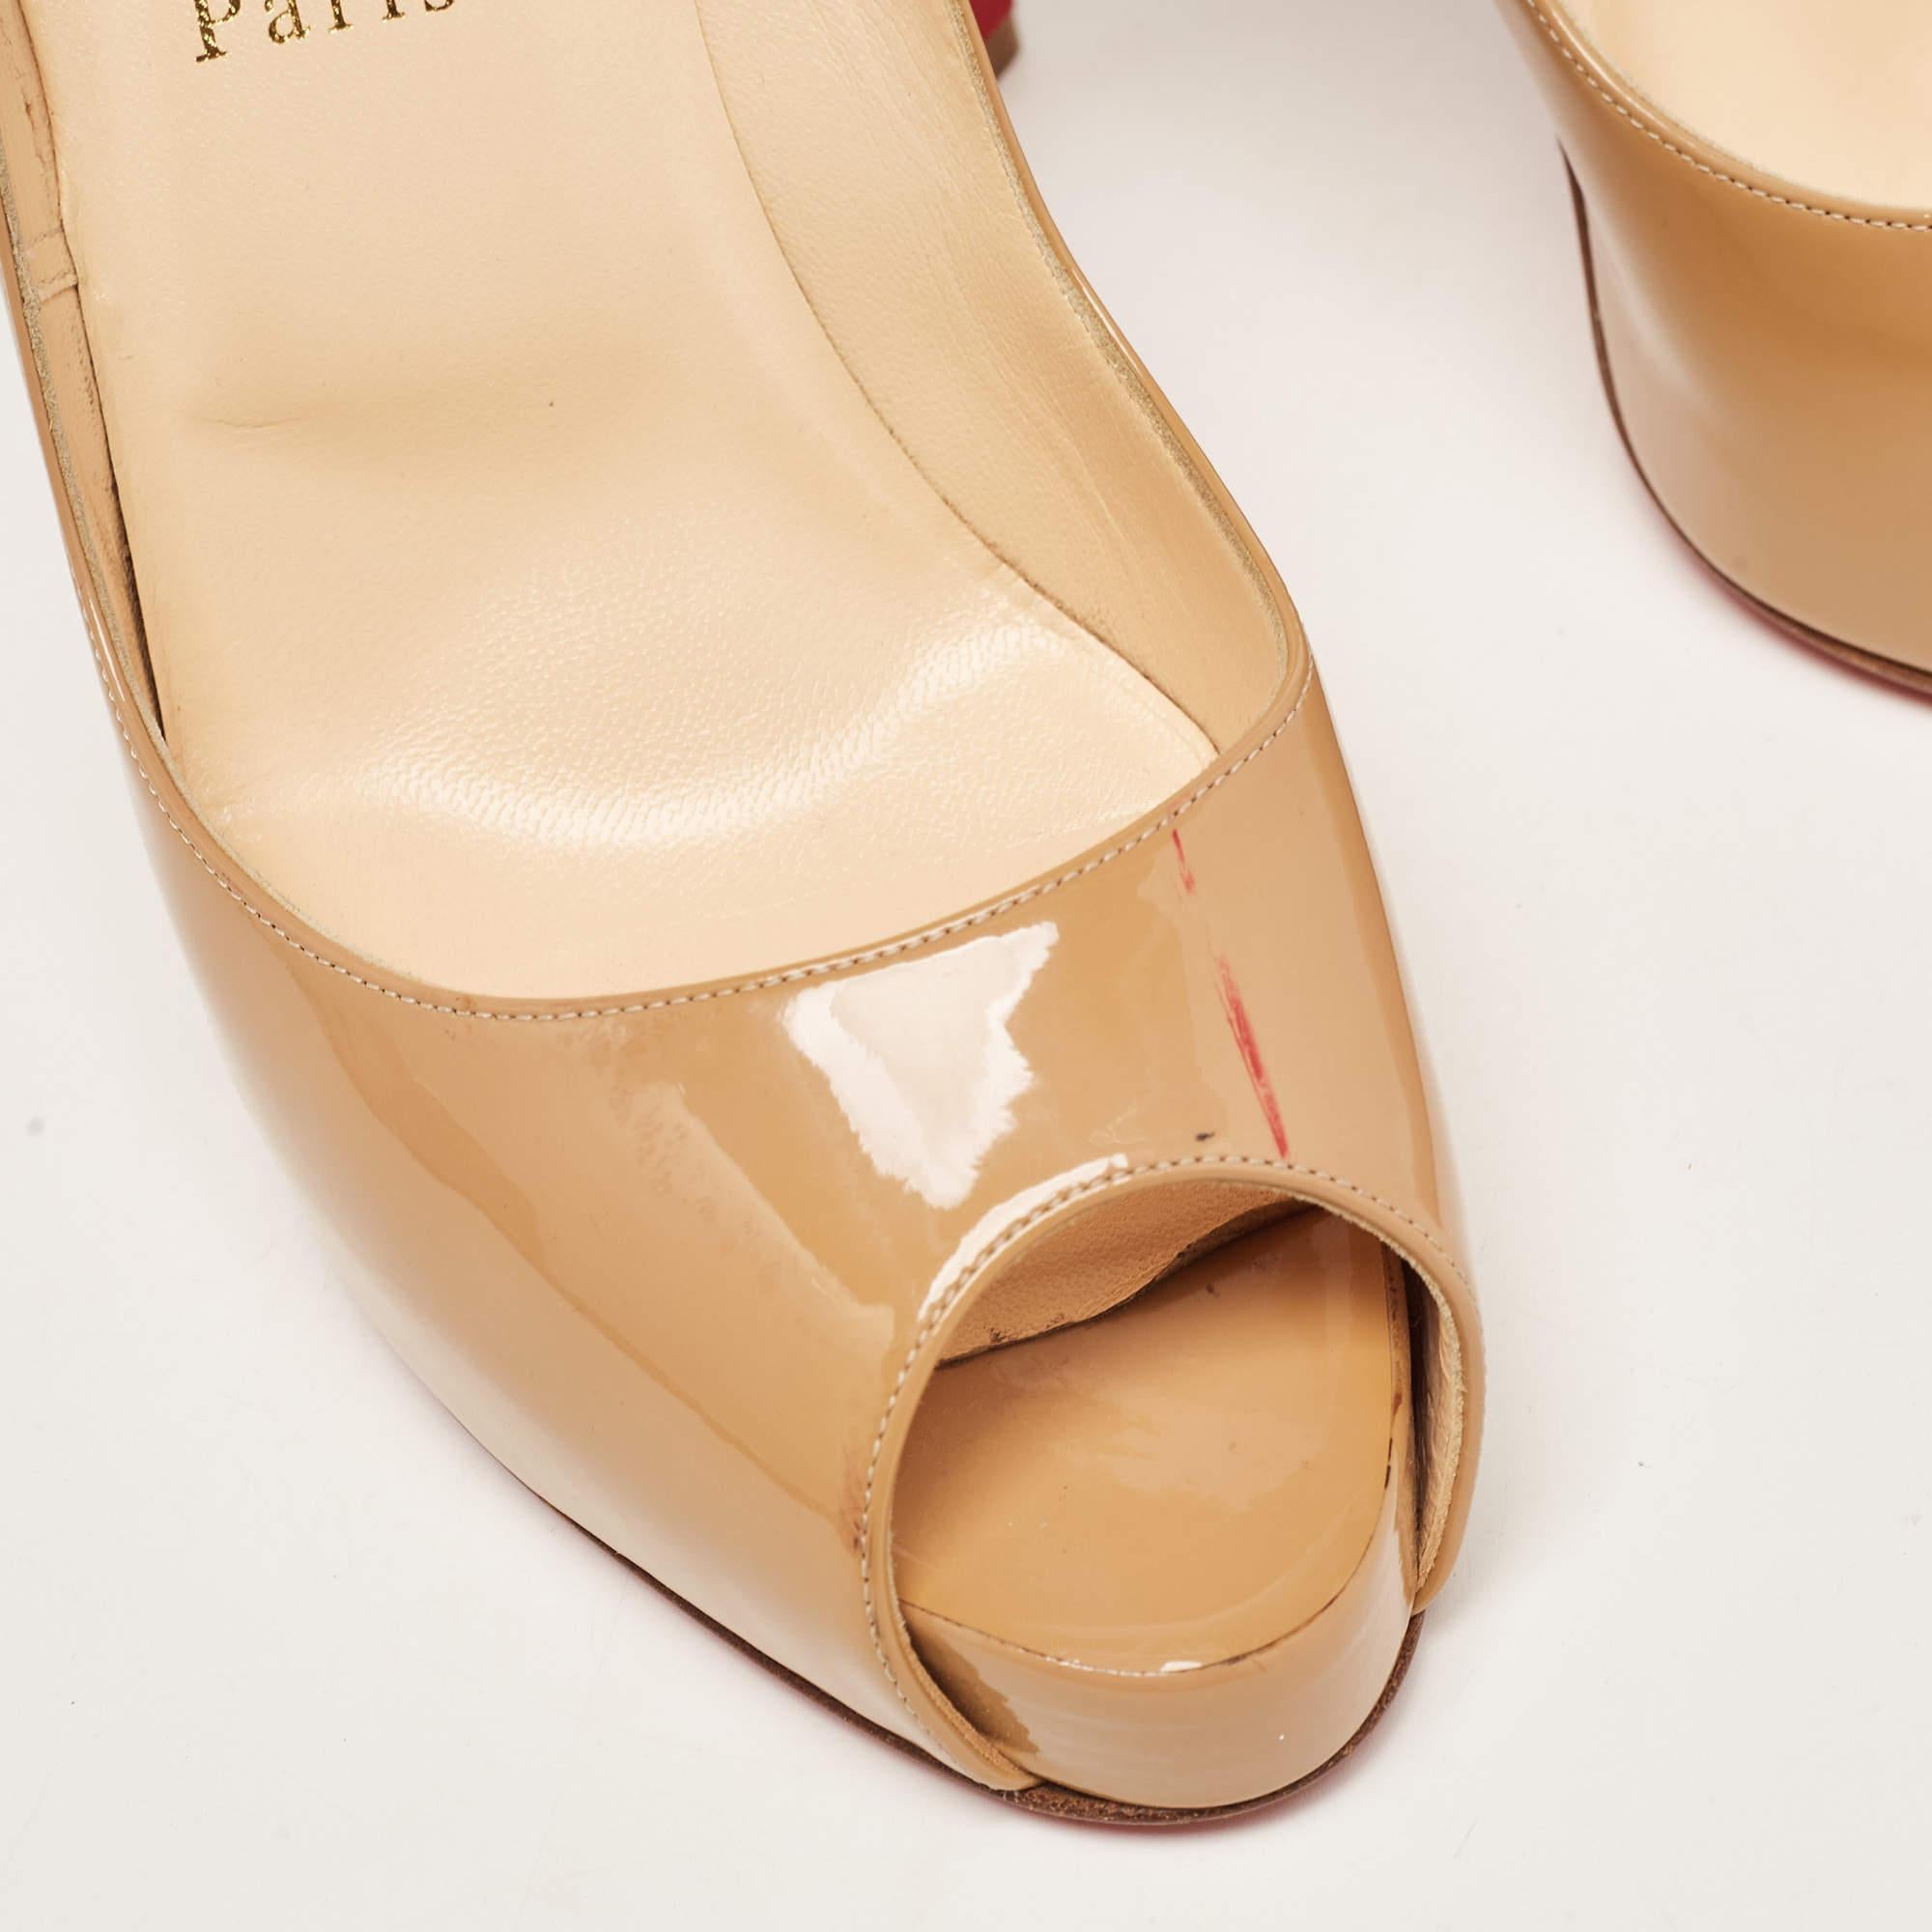 Christian Louboutin Beige Patent Leather Very Prive Pumps Size 41 For Sale 3